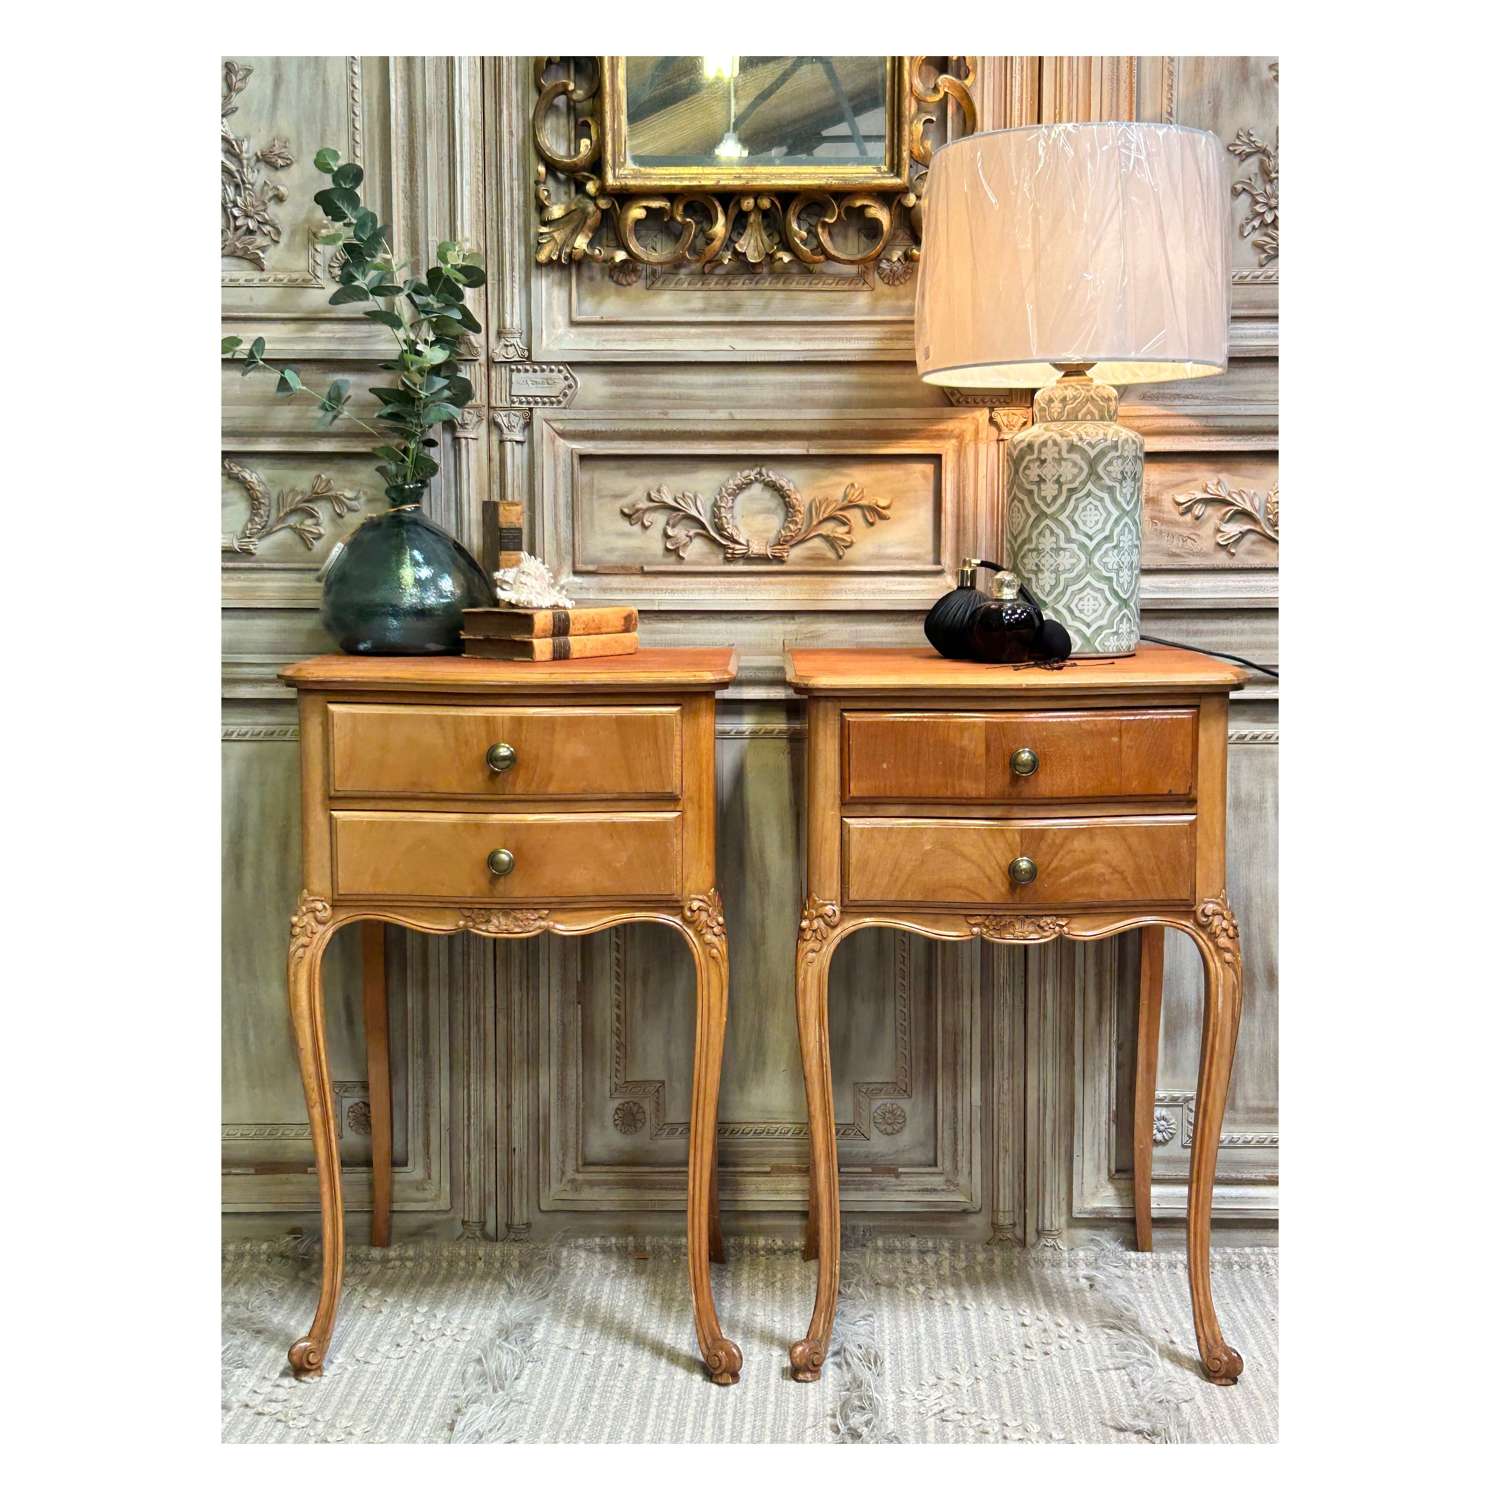 Pair of French Walnut Bedside Tables with 2 drawers